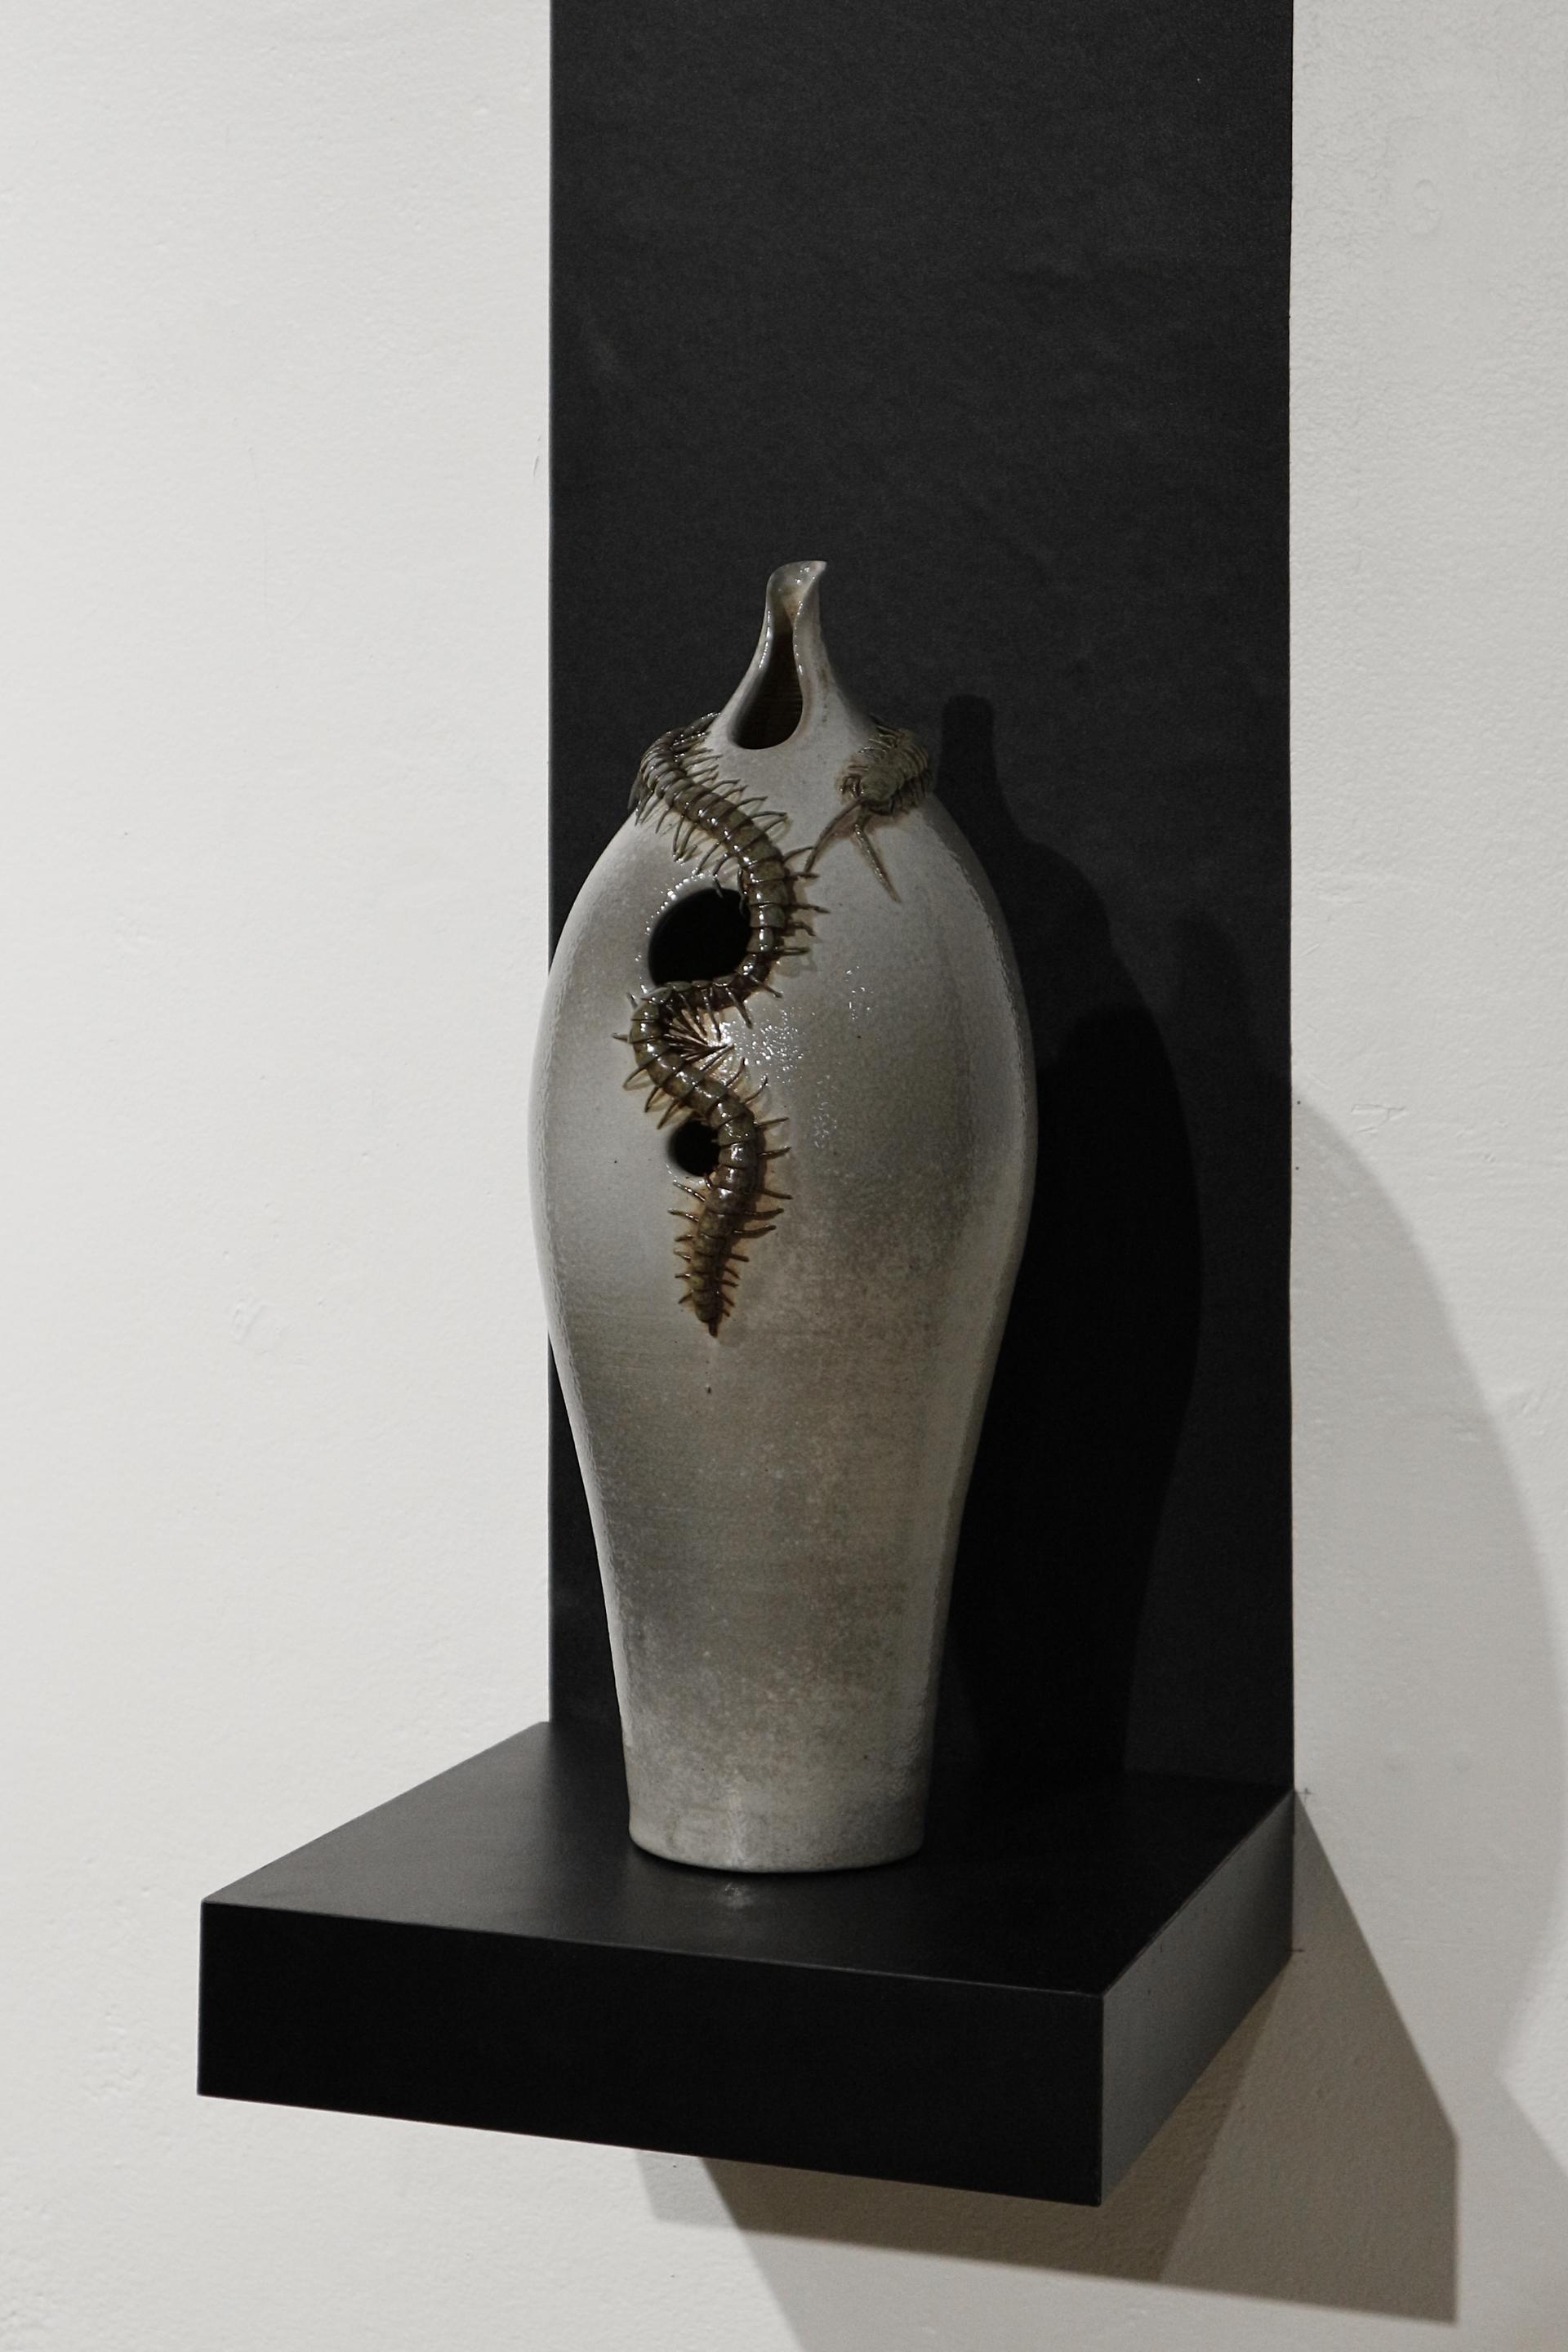 Soda-fired ceramic vessel with a hand-sculpted centipede around the neck.